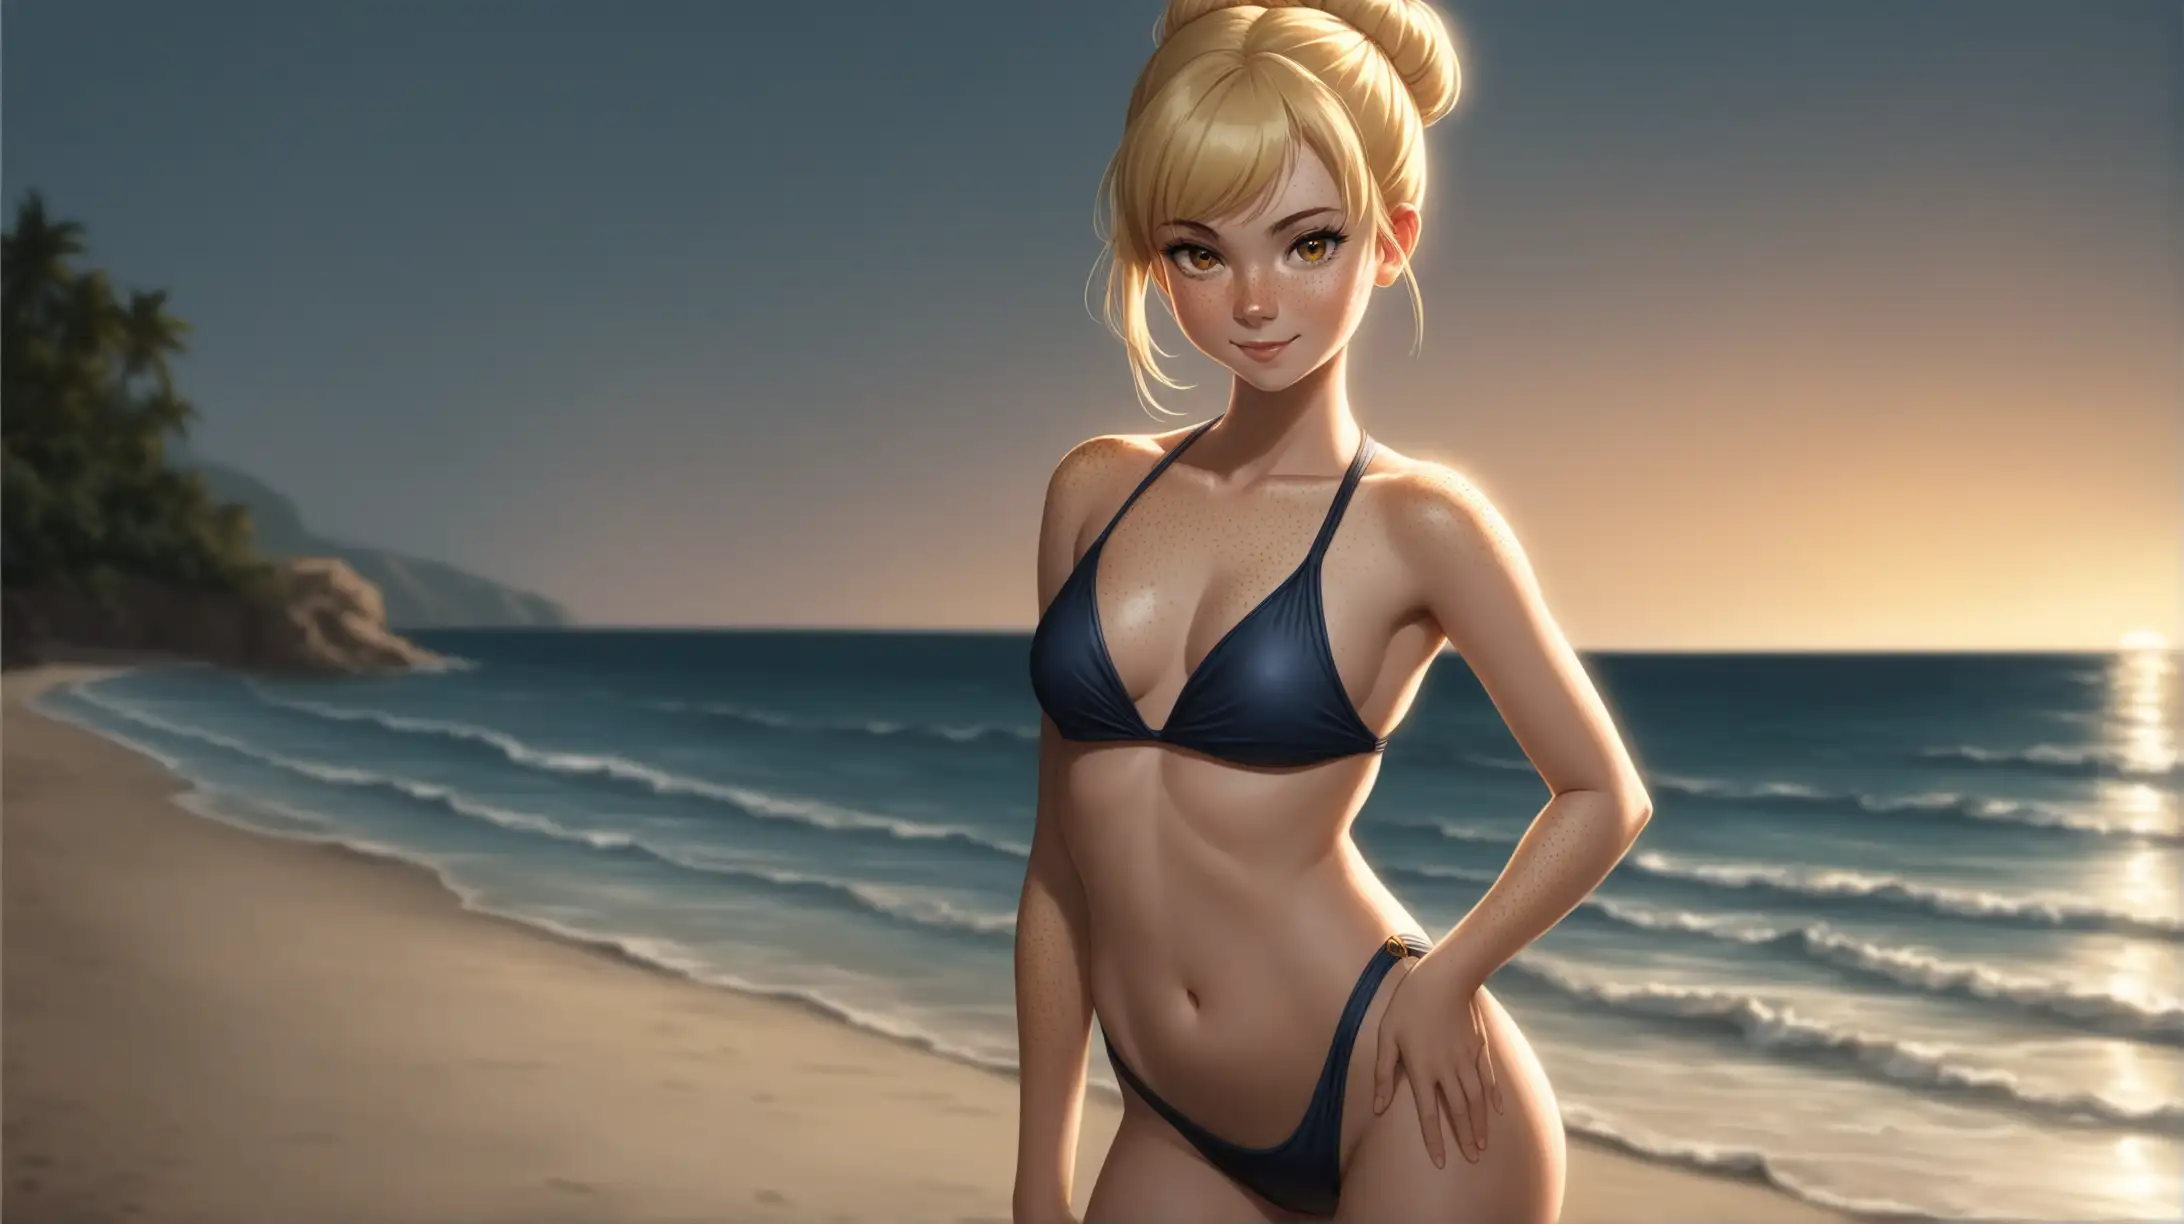 Draw a young woman, long blonde hair in a bun, gold eyes, freckles, perky figure,
swimsuit, high quality, long shot, outdoors, beach, seductive pose, standing, dim lighting, smiling at the viewer